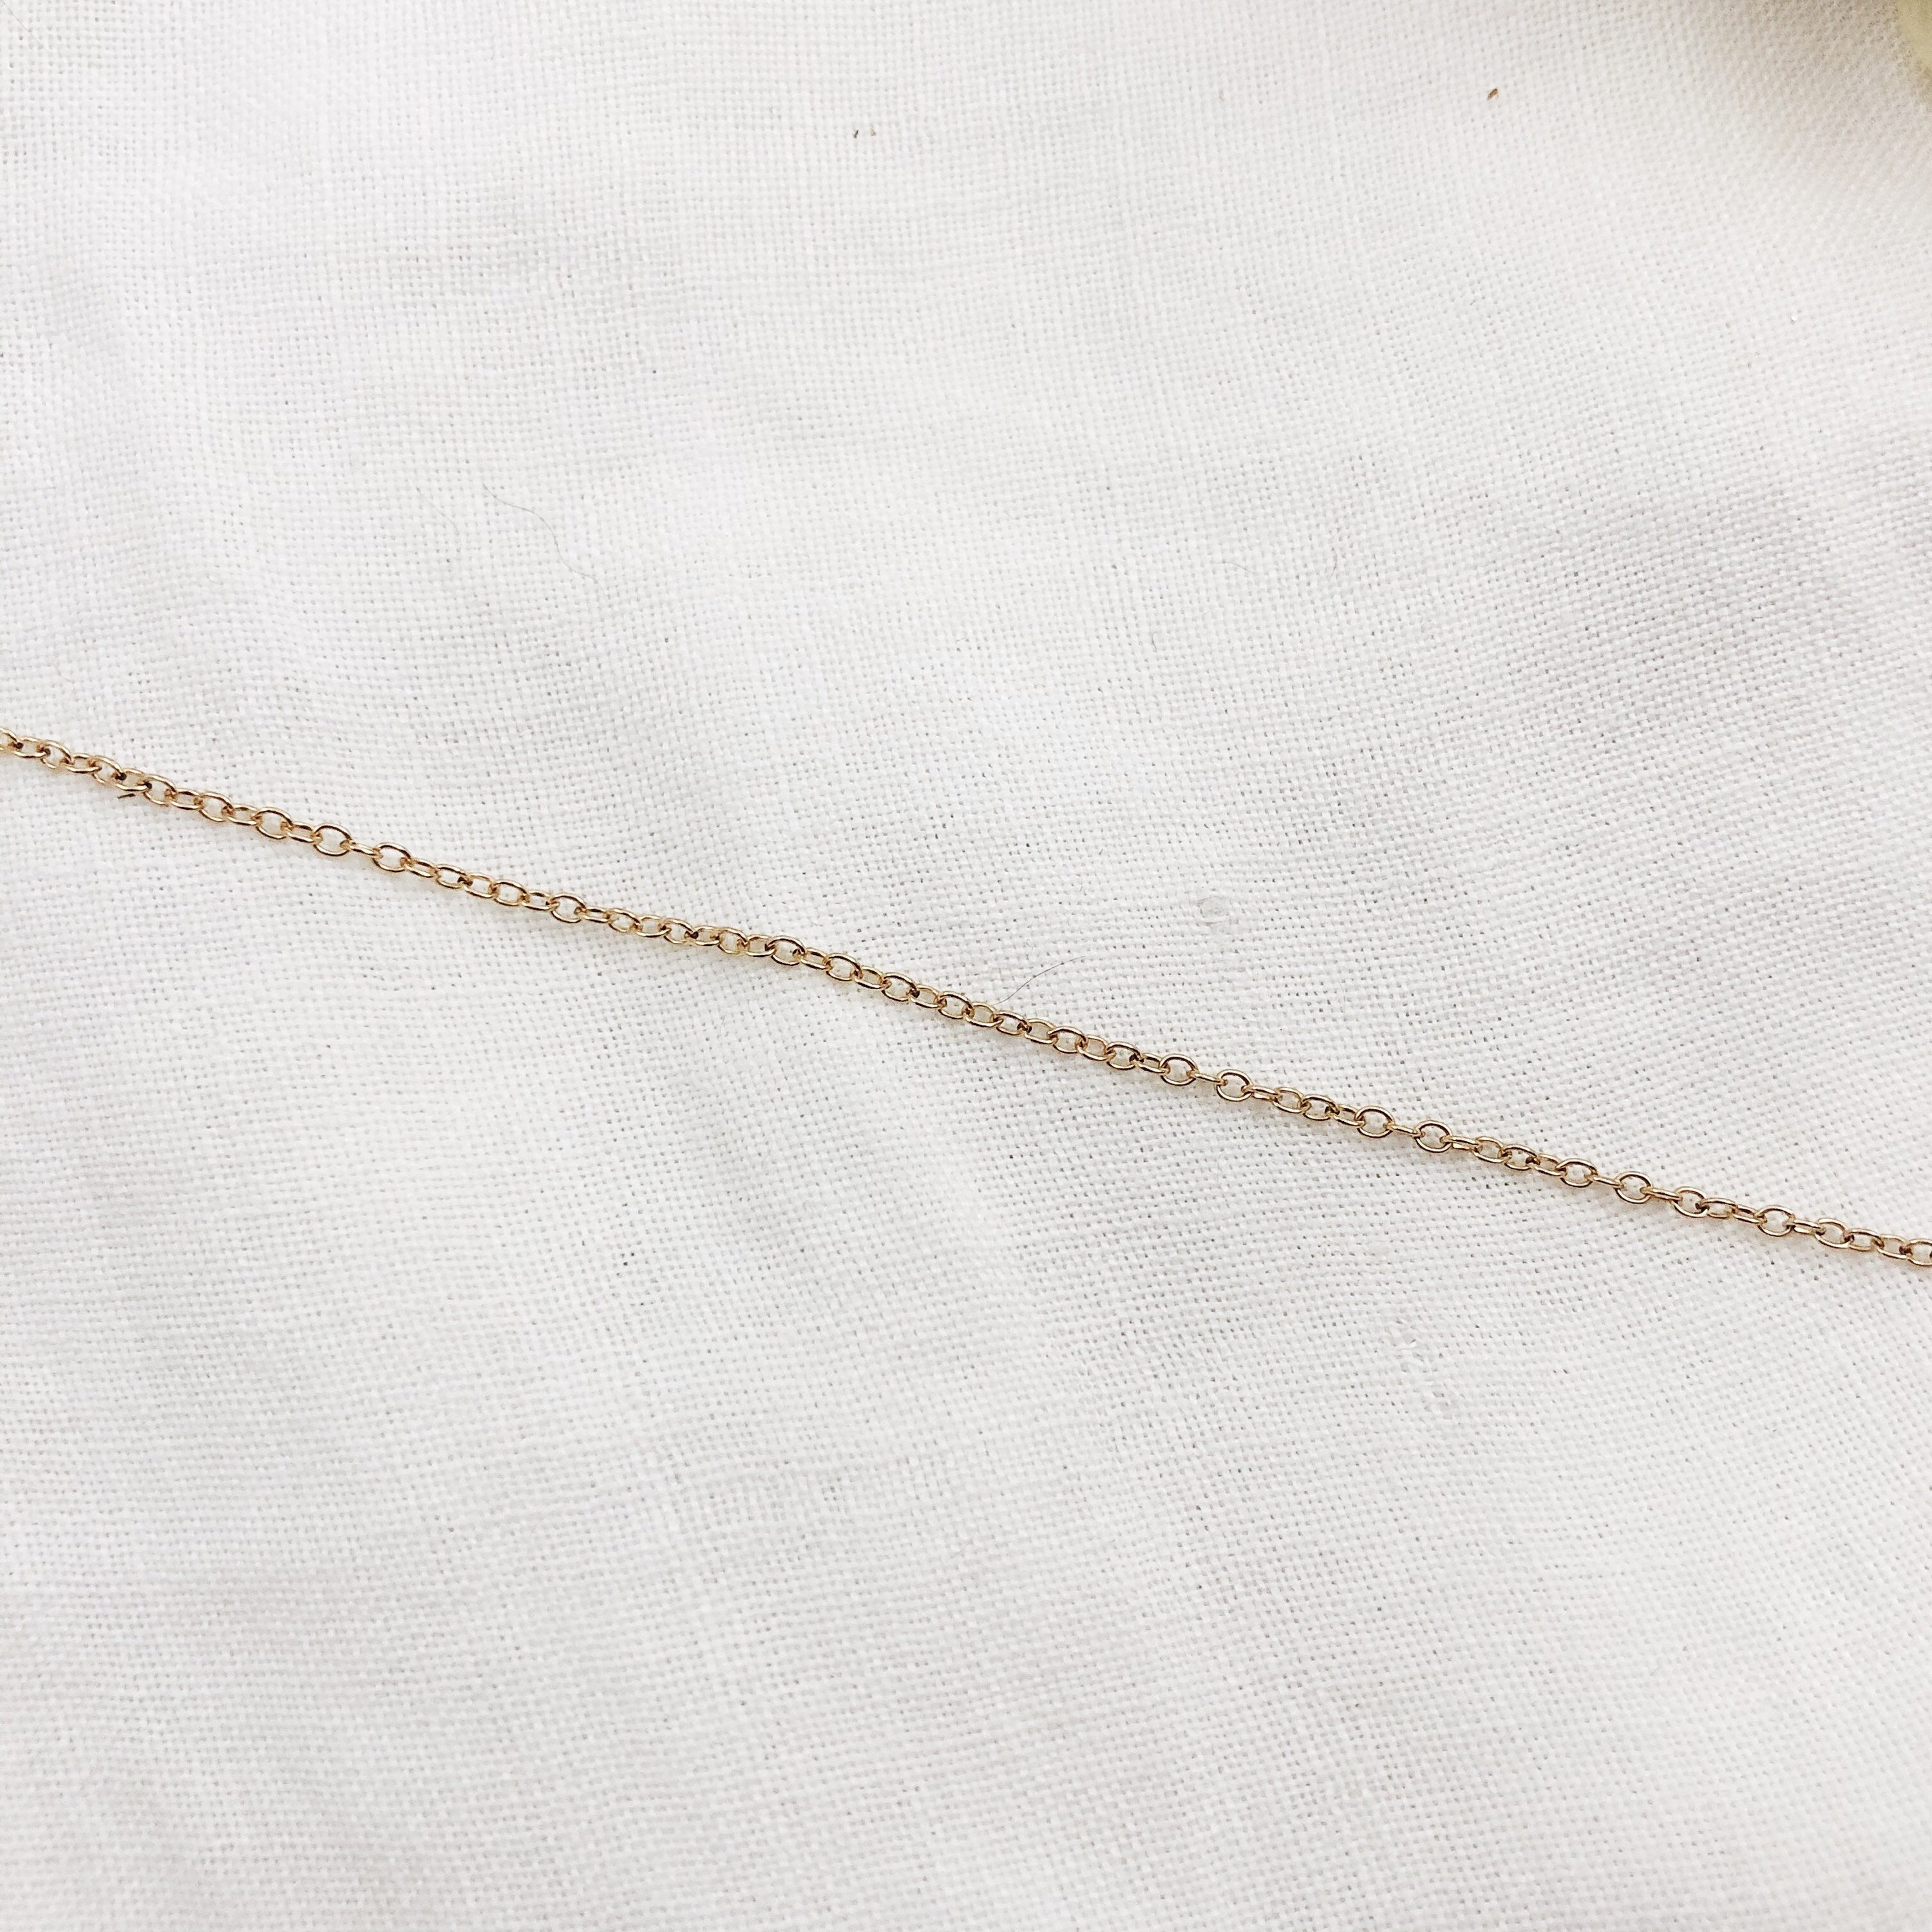 GOLD FILLED chain - add on item only